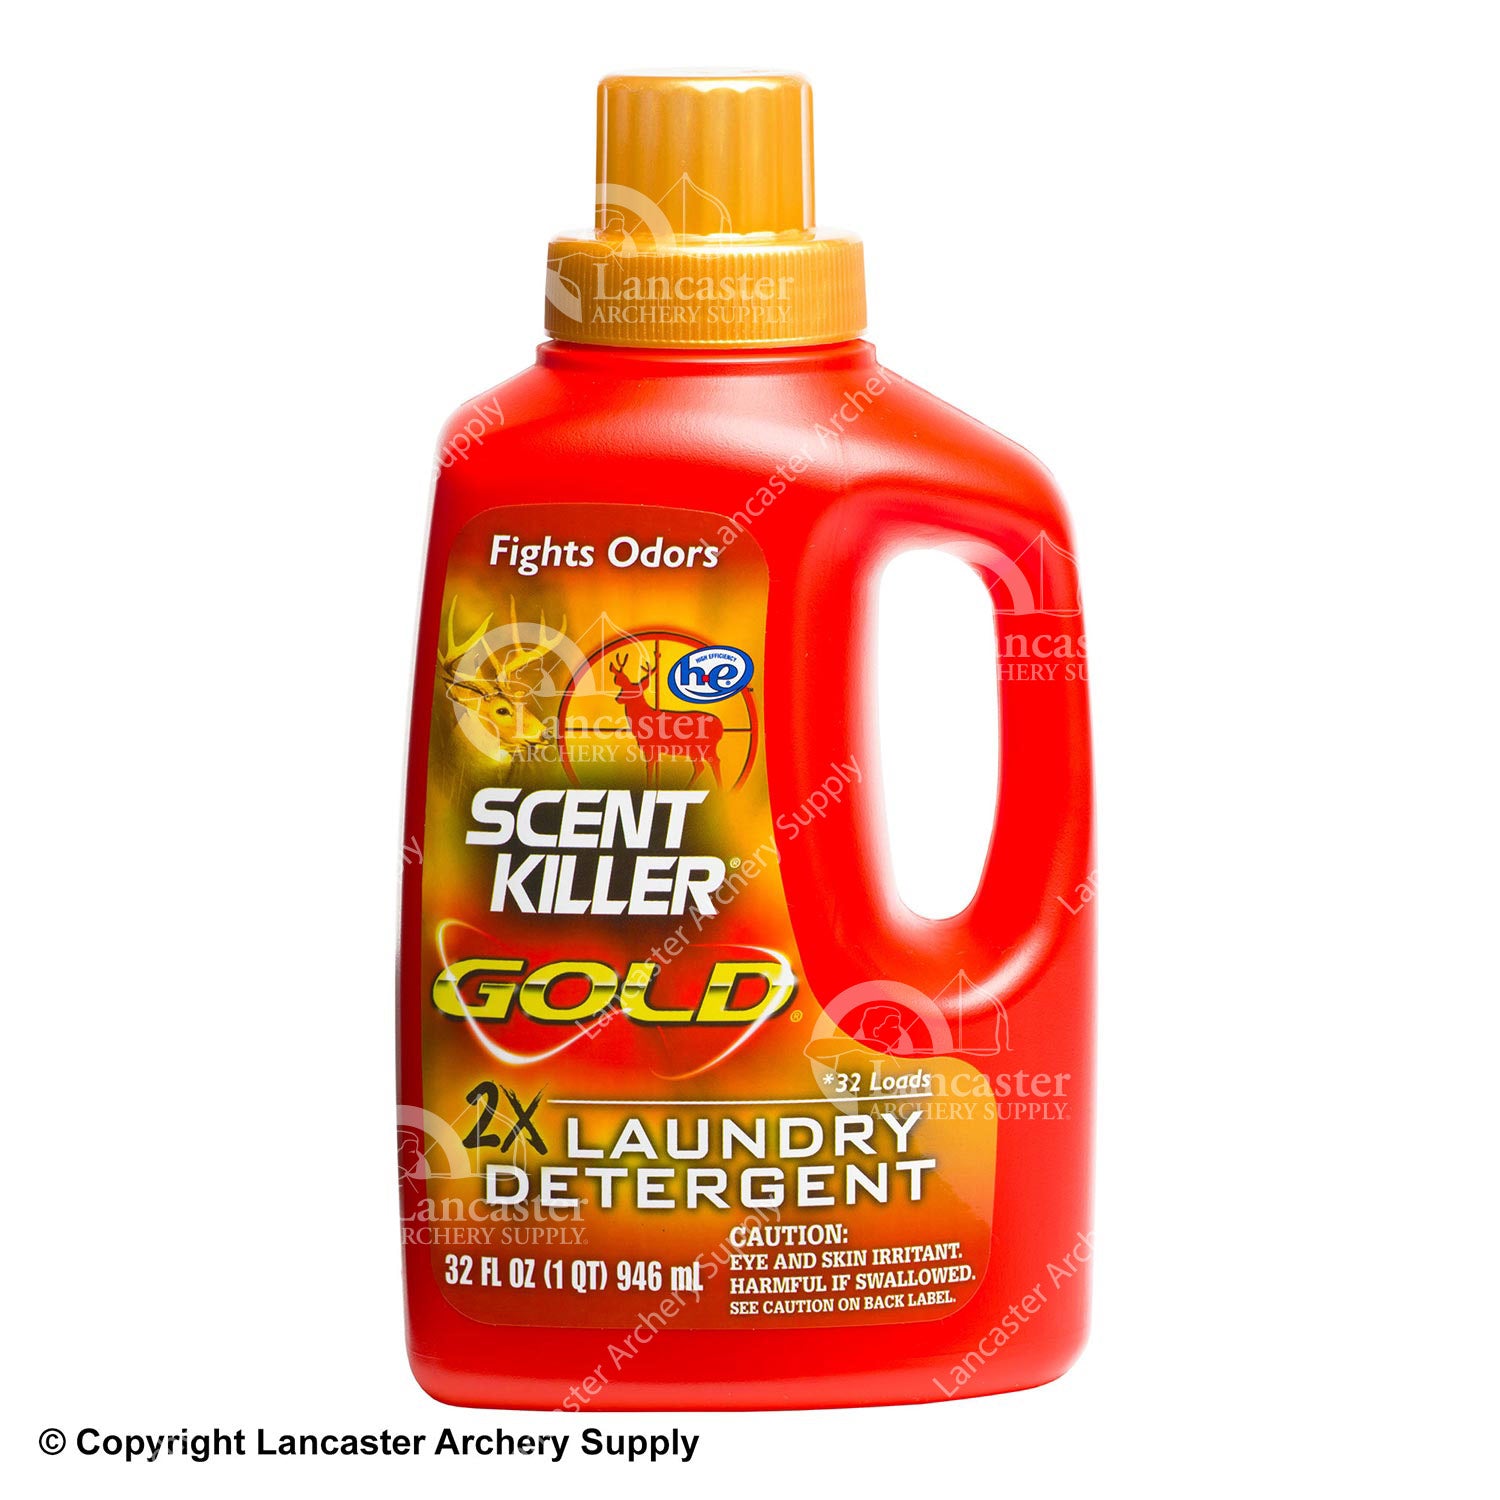 Wildlife Research Center Scent Killer Gold Laundry Detergent